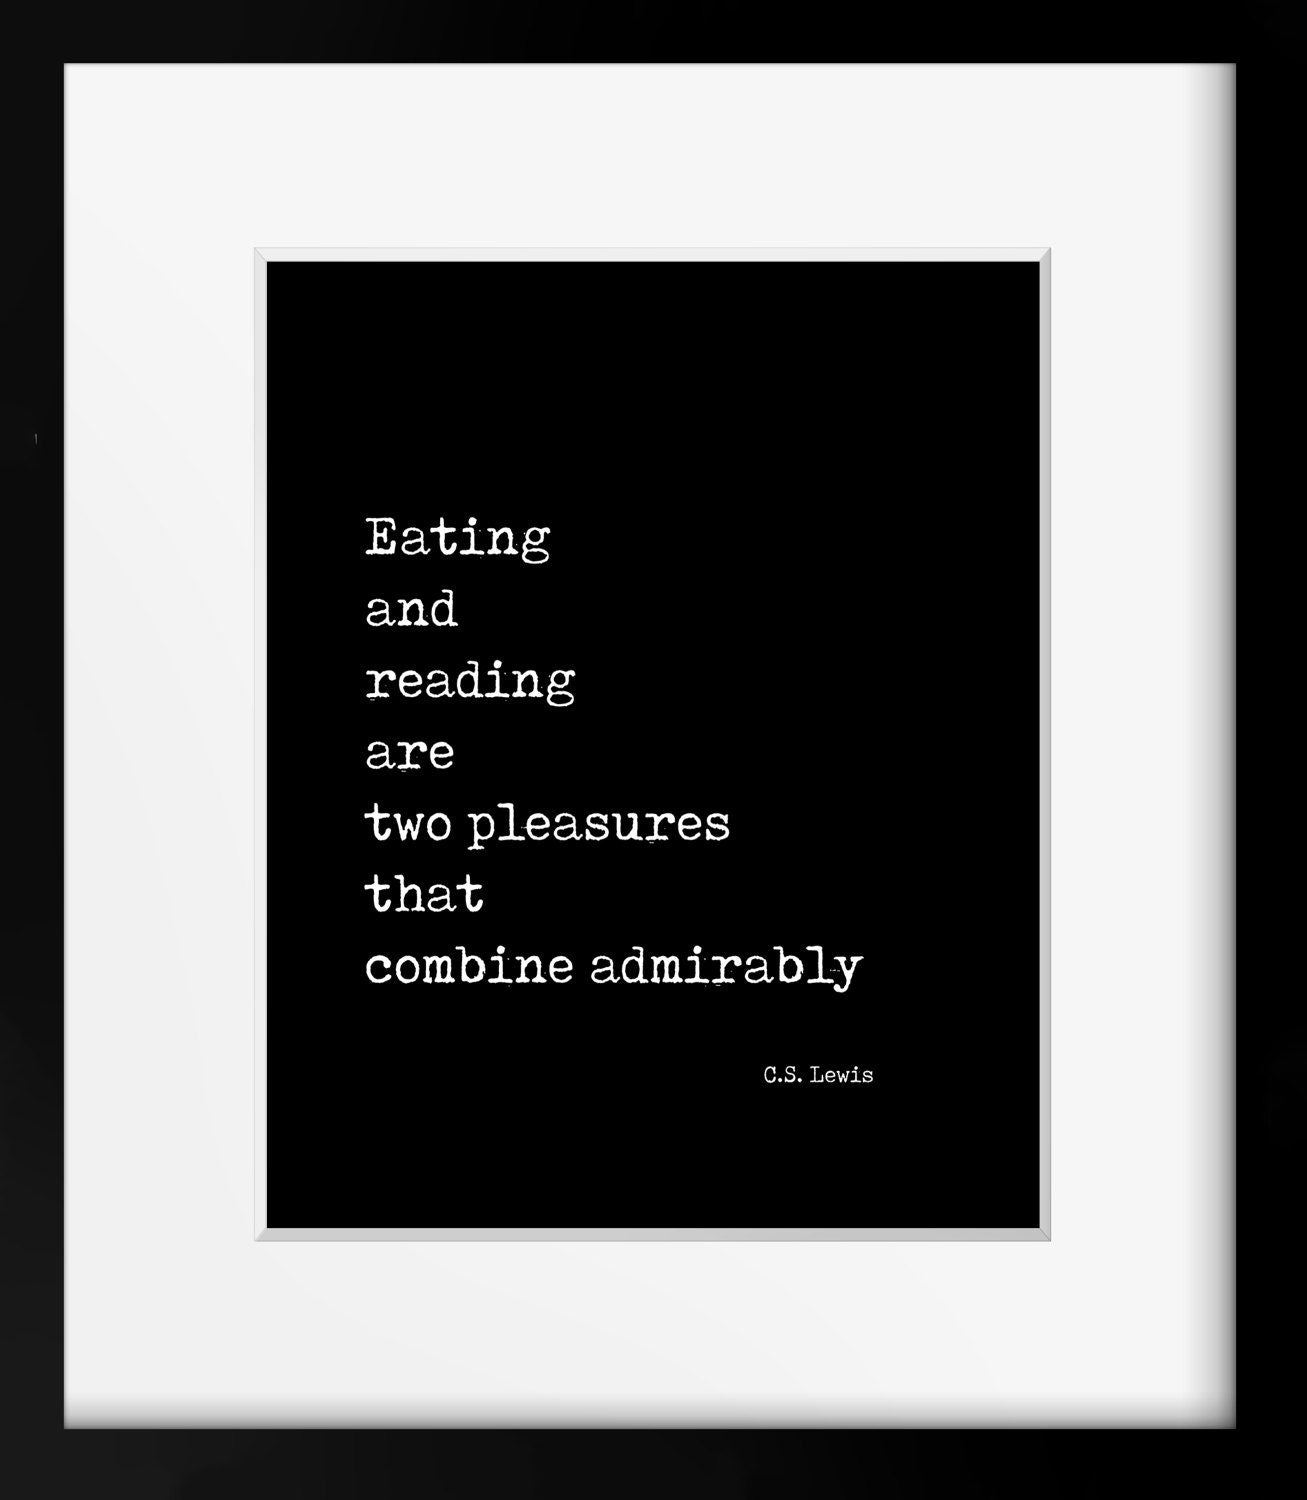 C S Lewis Wall Art Prints, Eating and reading are two pleasures that combine admirably